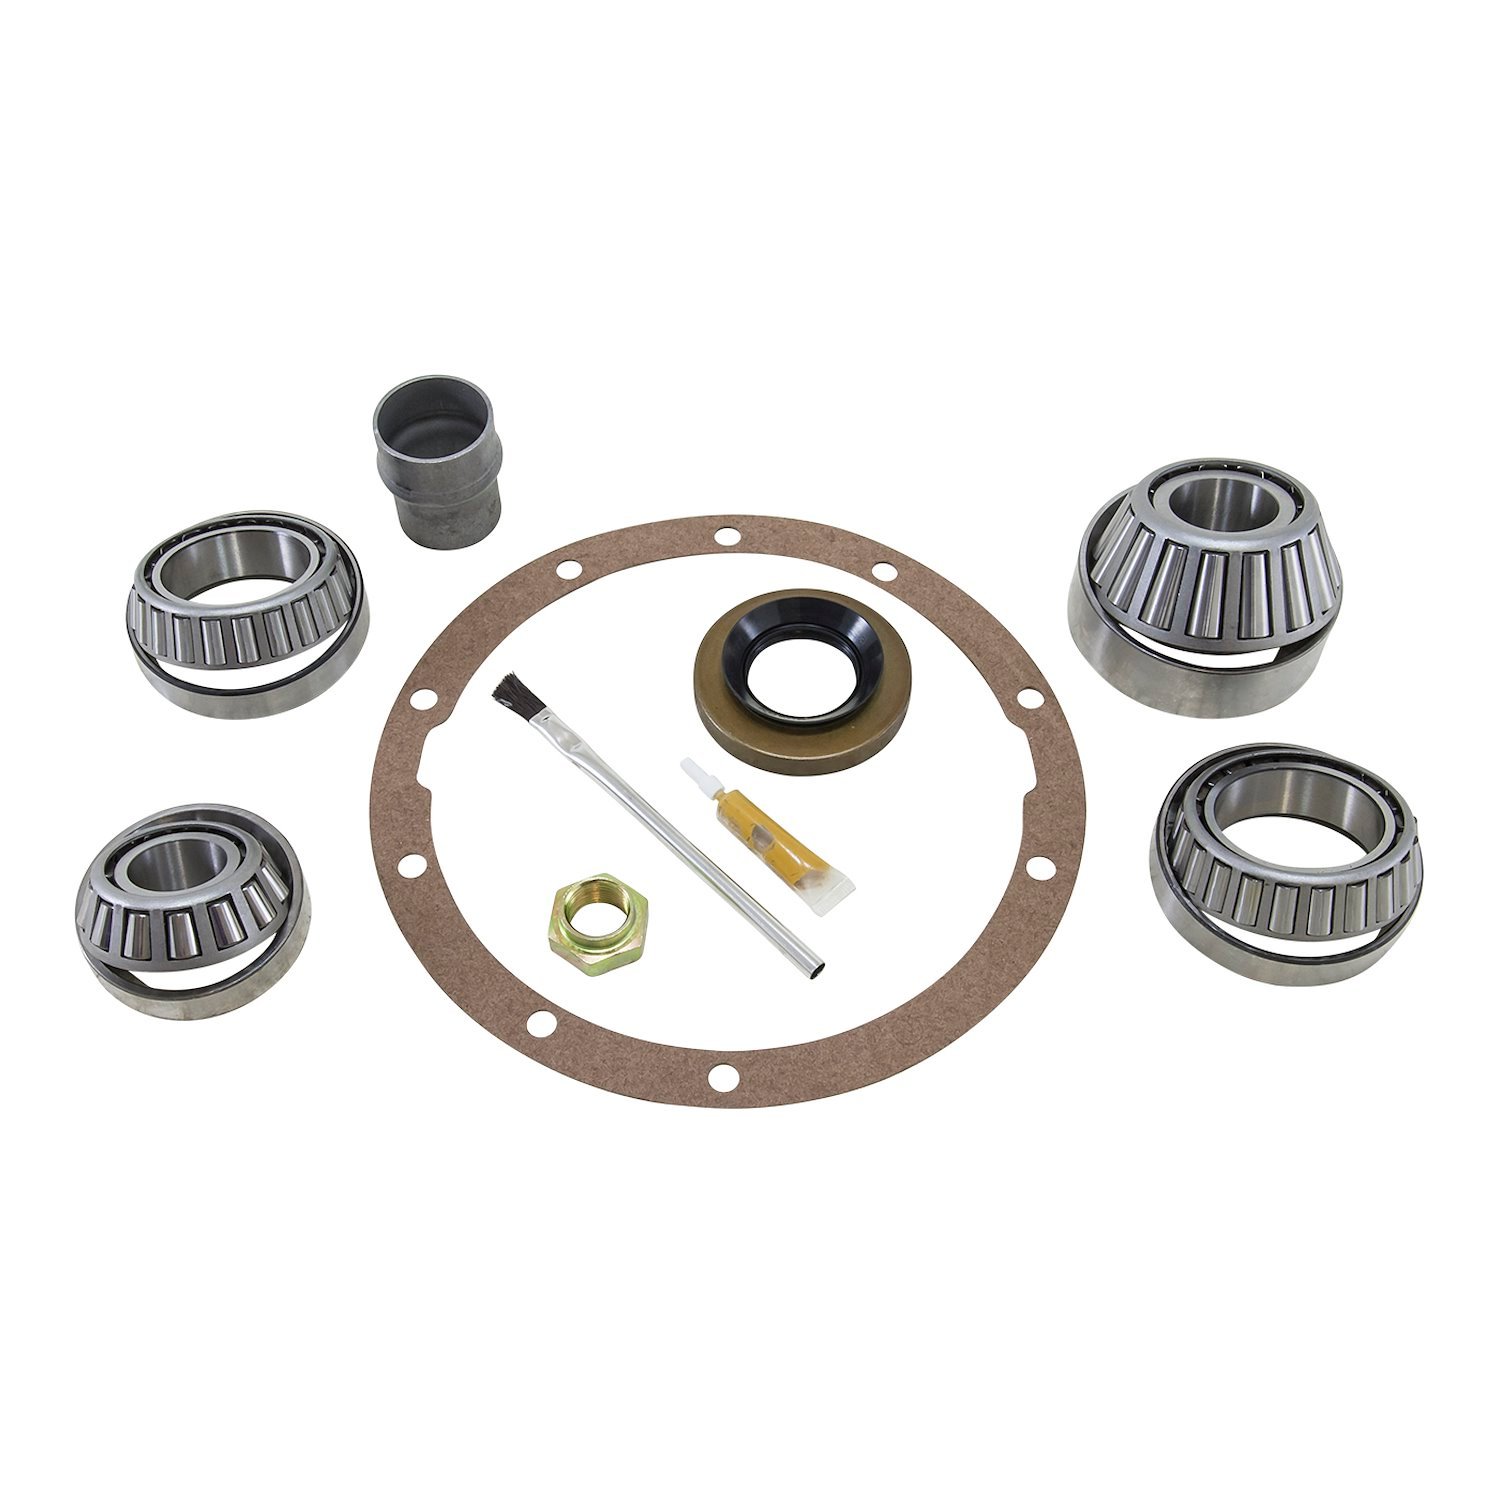 Bearing Install Kit For Toyota Turbo 4 And V6 Diff W/ 27 Spline Pinion